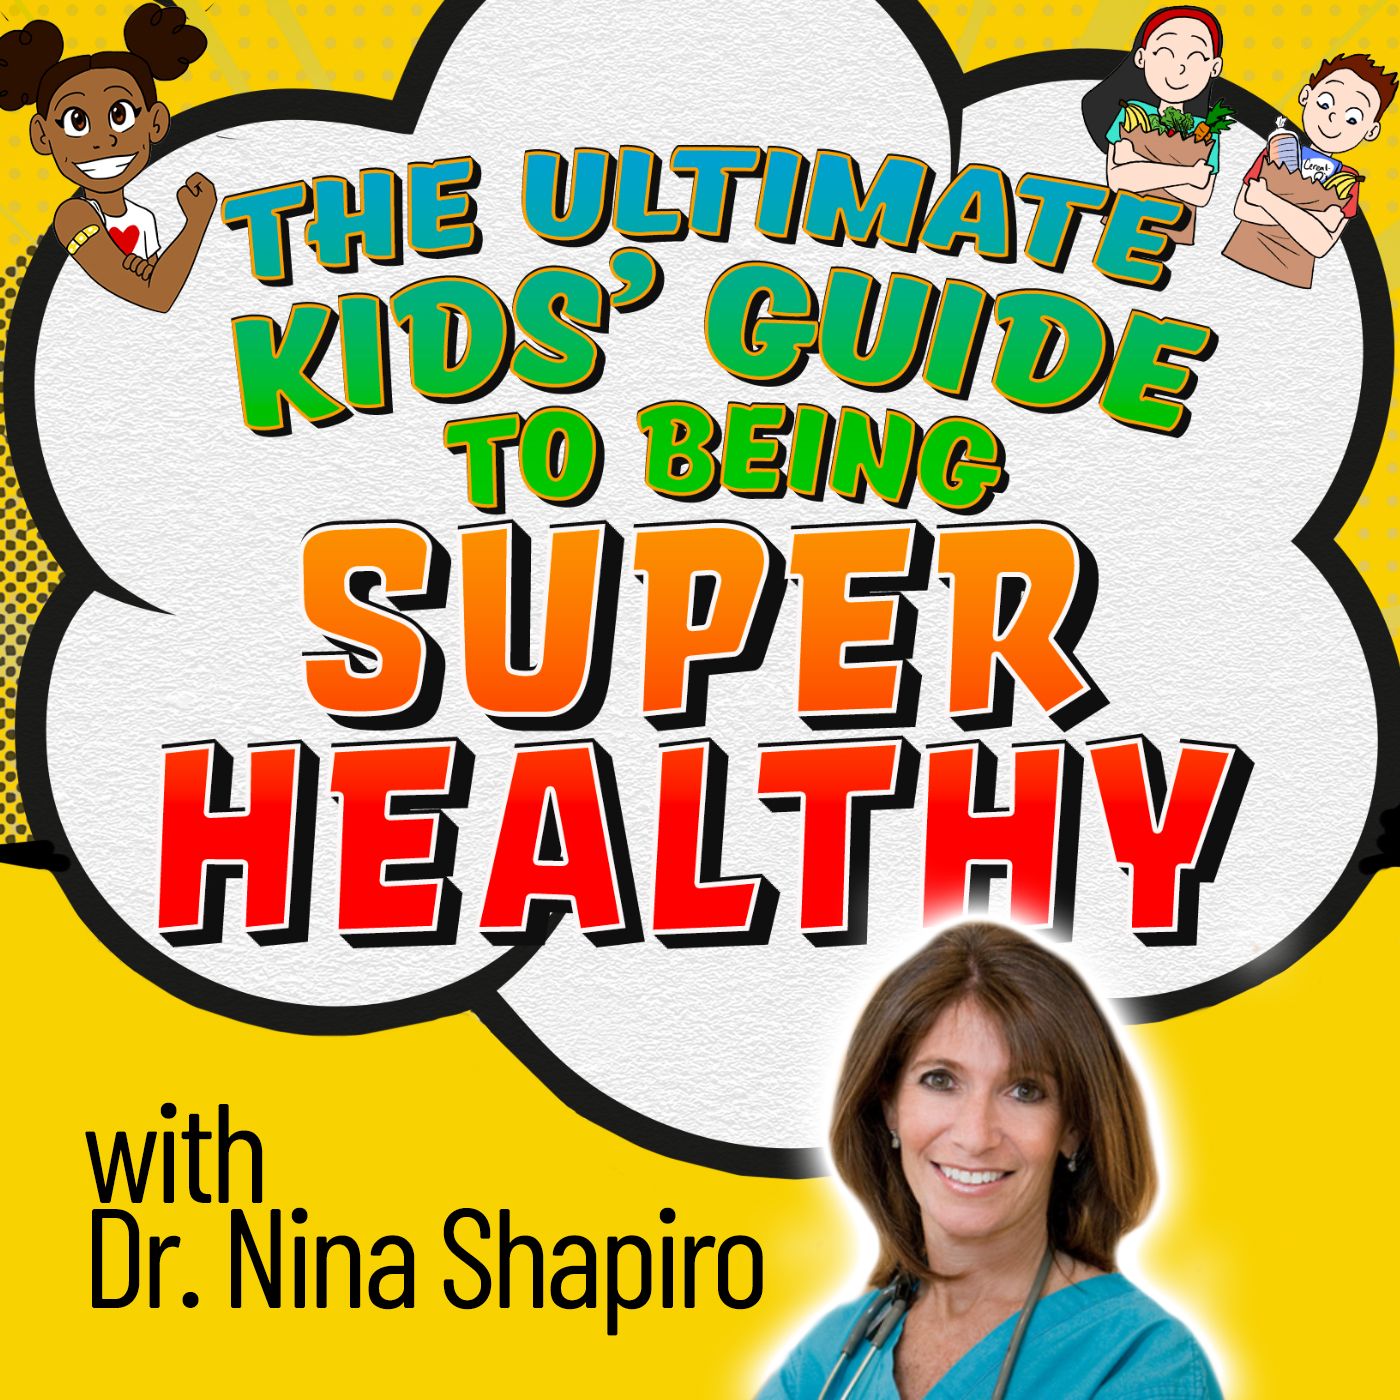 The Ultimate Kids’ Guide to Being Super Healthy (with Dr. Nina Shapiro)